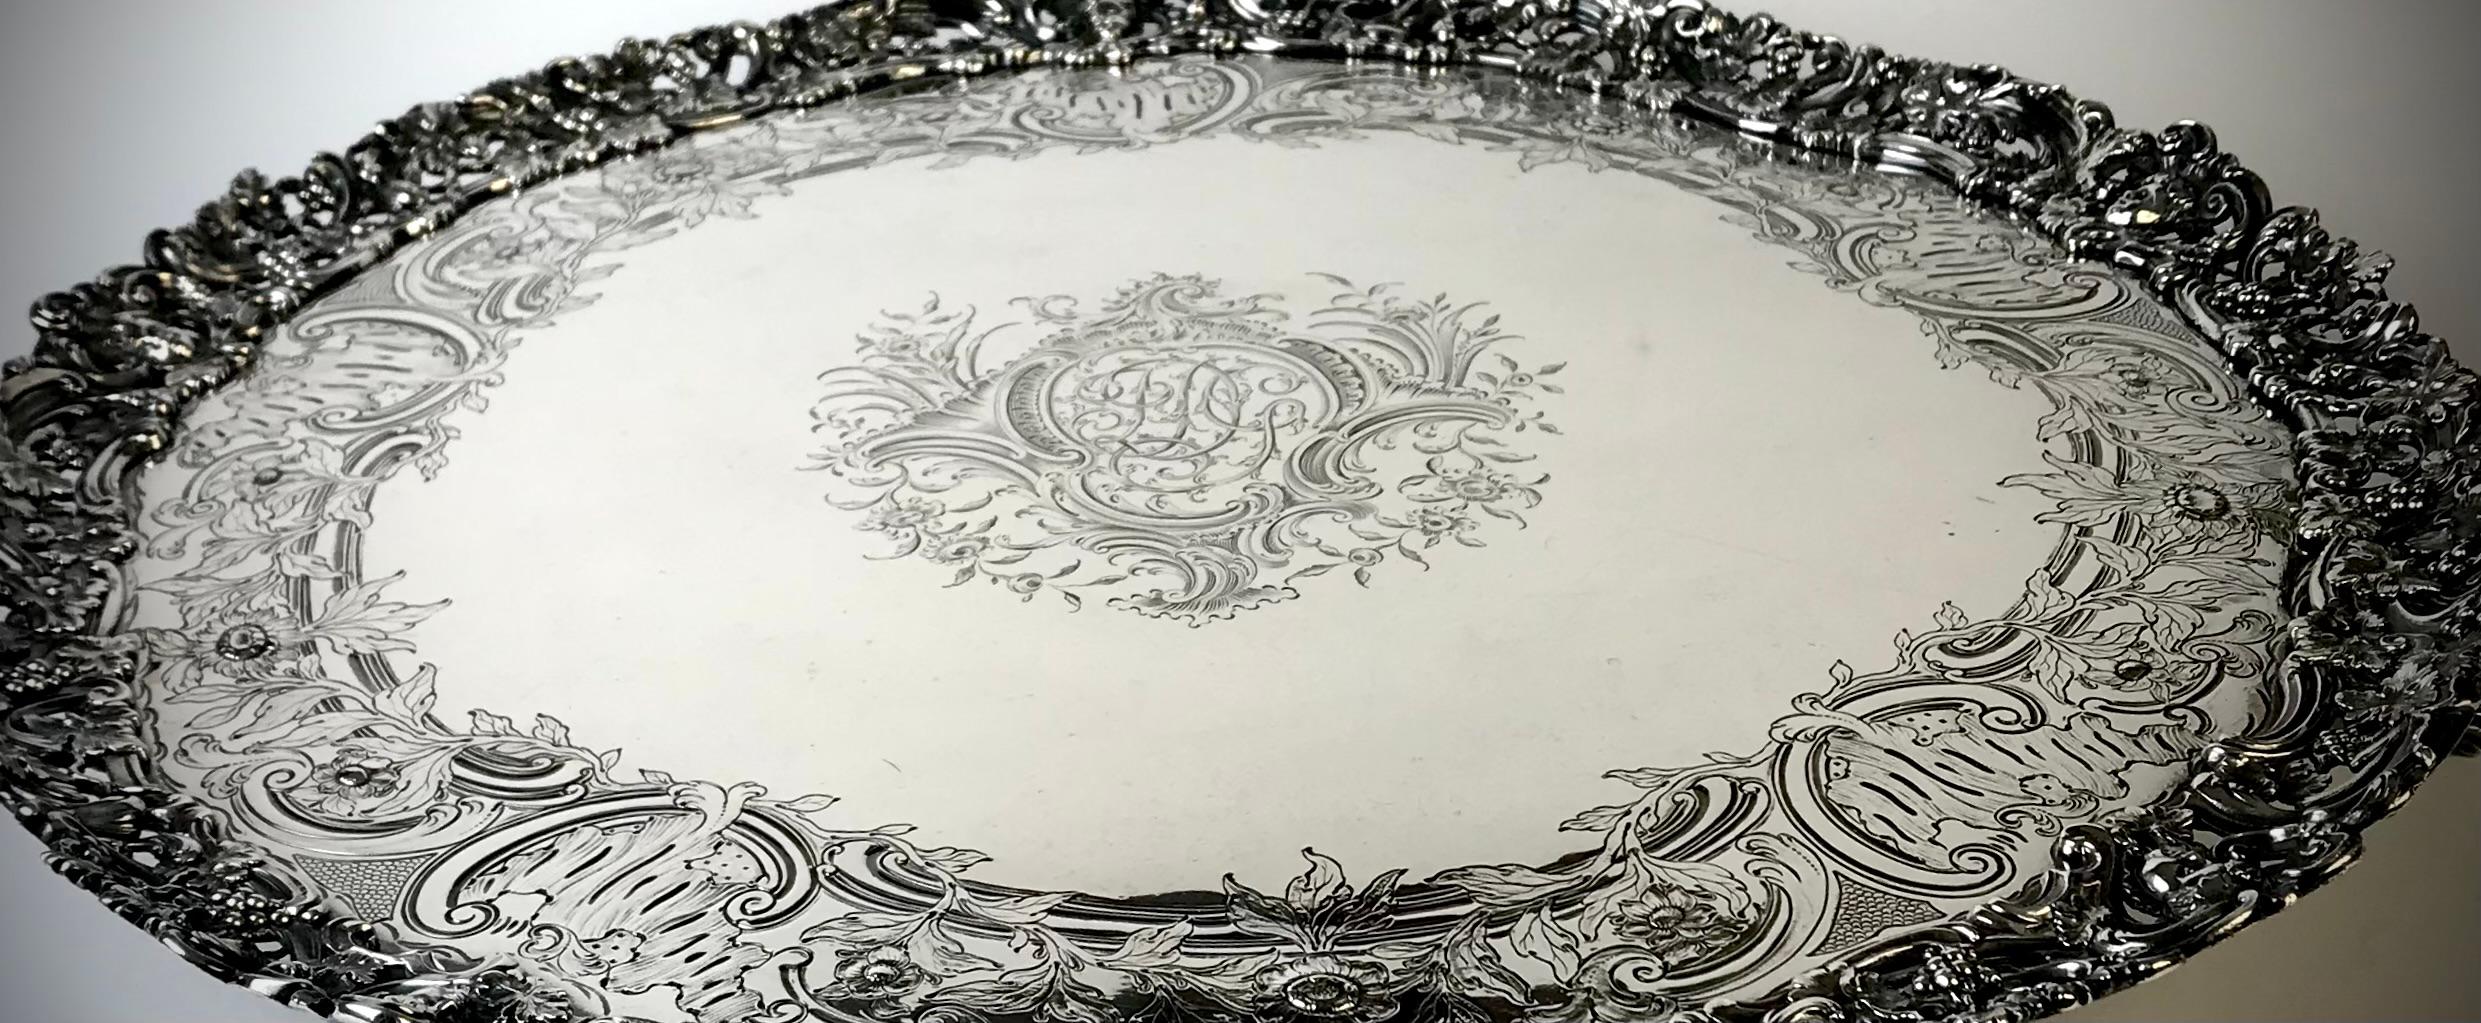 A magnificent Solid Silver Sterling Georgian salver made by the celebrated Huguenot silversmith Samuel Courtauld.

Very impressive size and weight with exquisite detailing to the border.

Hallmarked for London 1762
Silversmith Samuel Courtauld